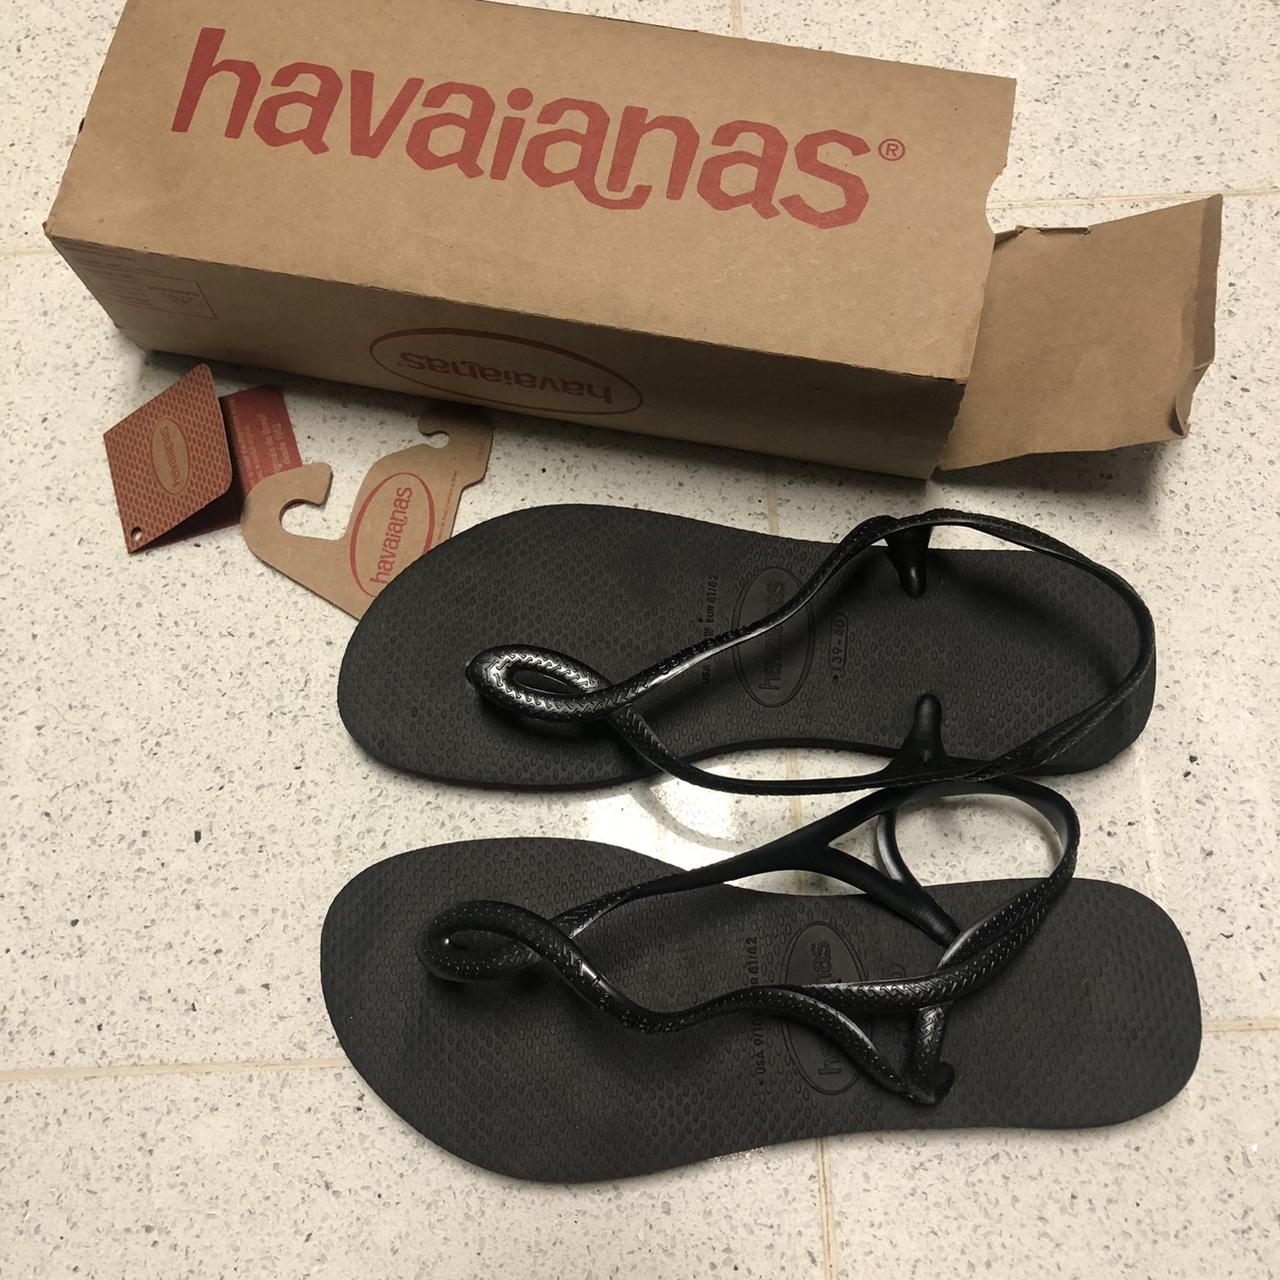 Havaianas Women's Black and Silver Sandals